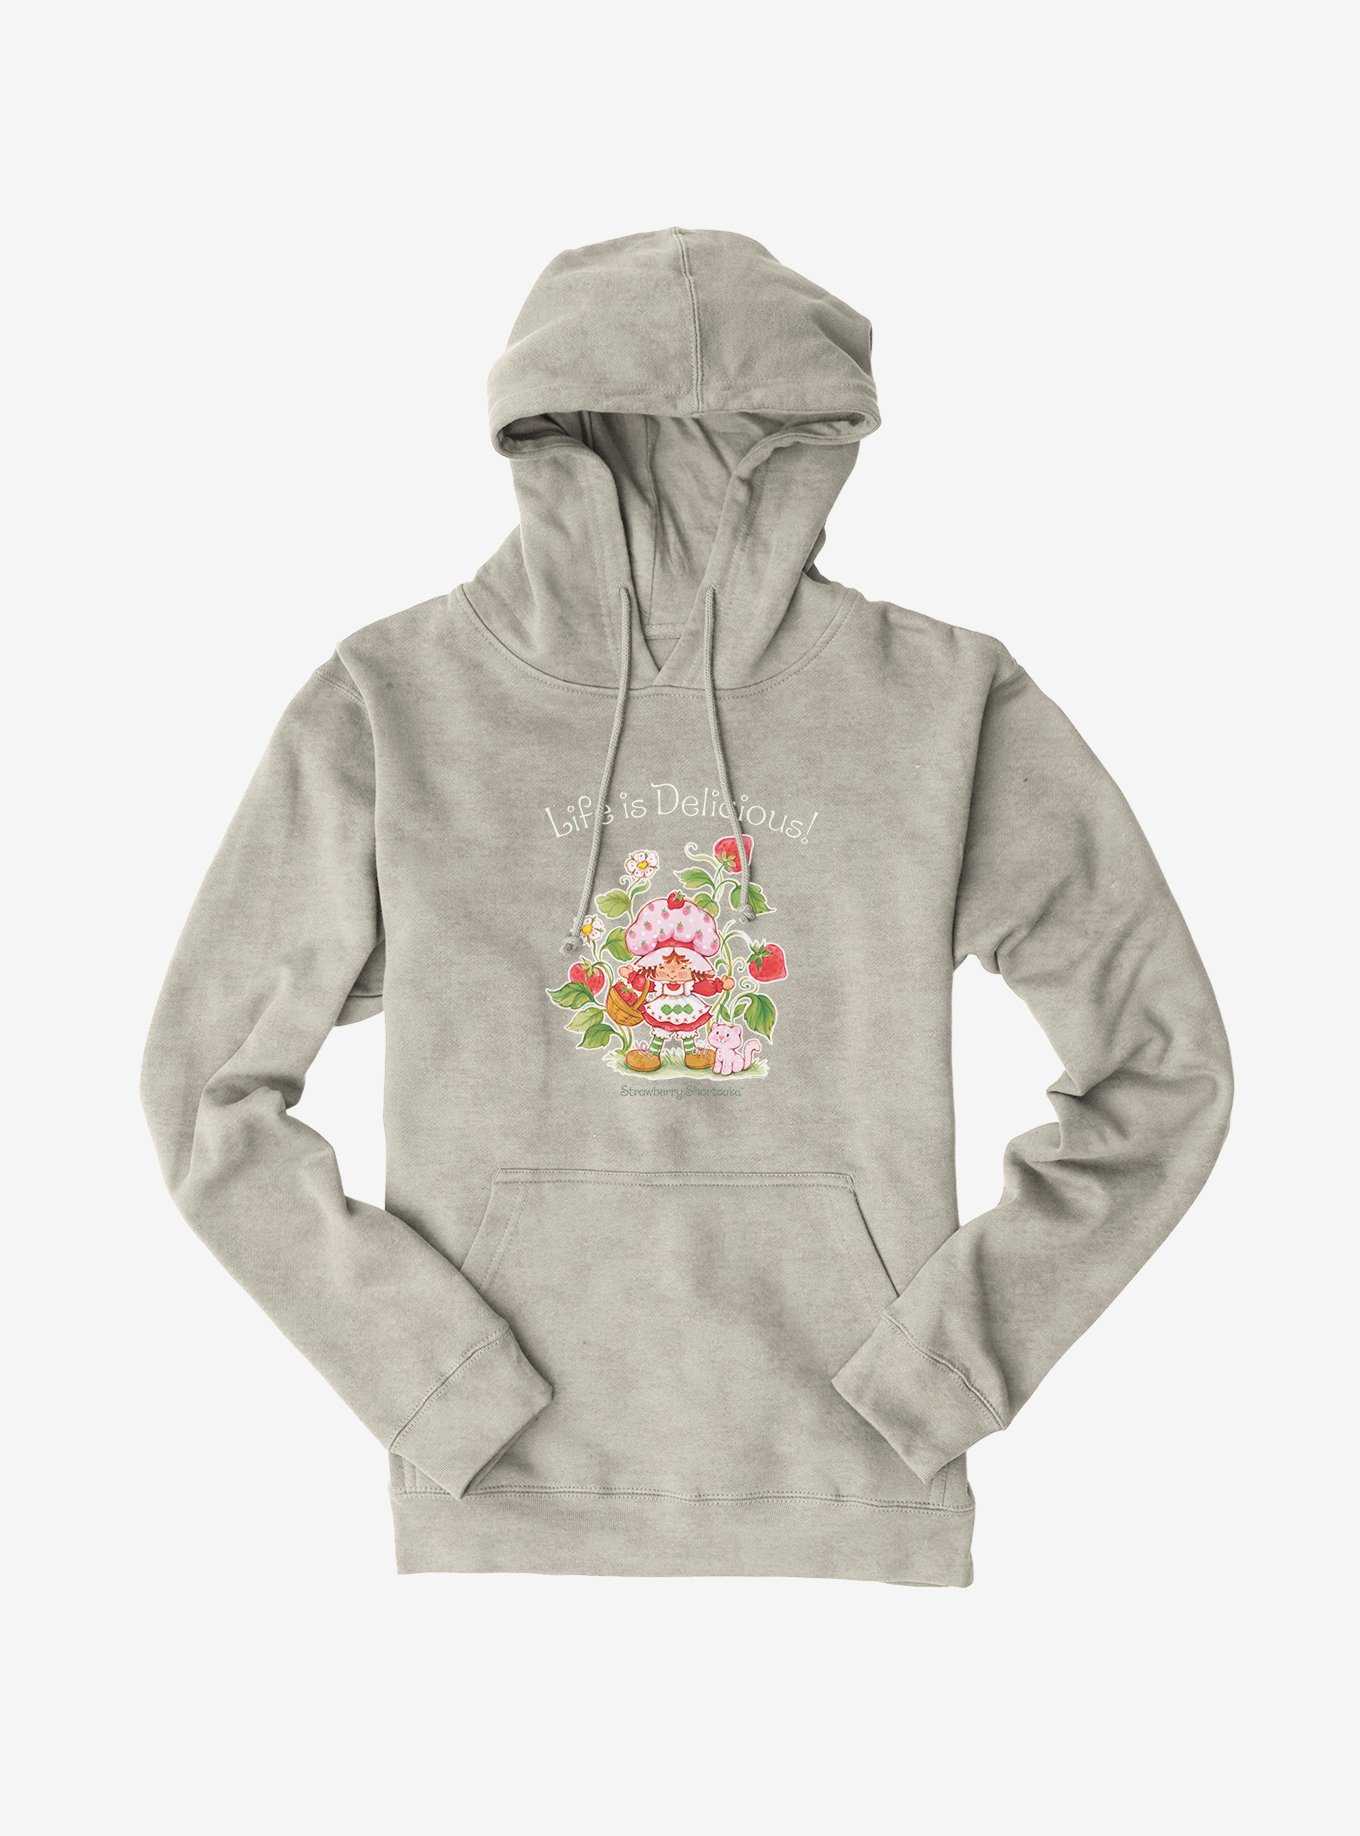 Strawberry Shortcake Life Is Delicious! Hoodie, , hi-res